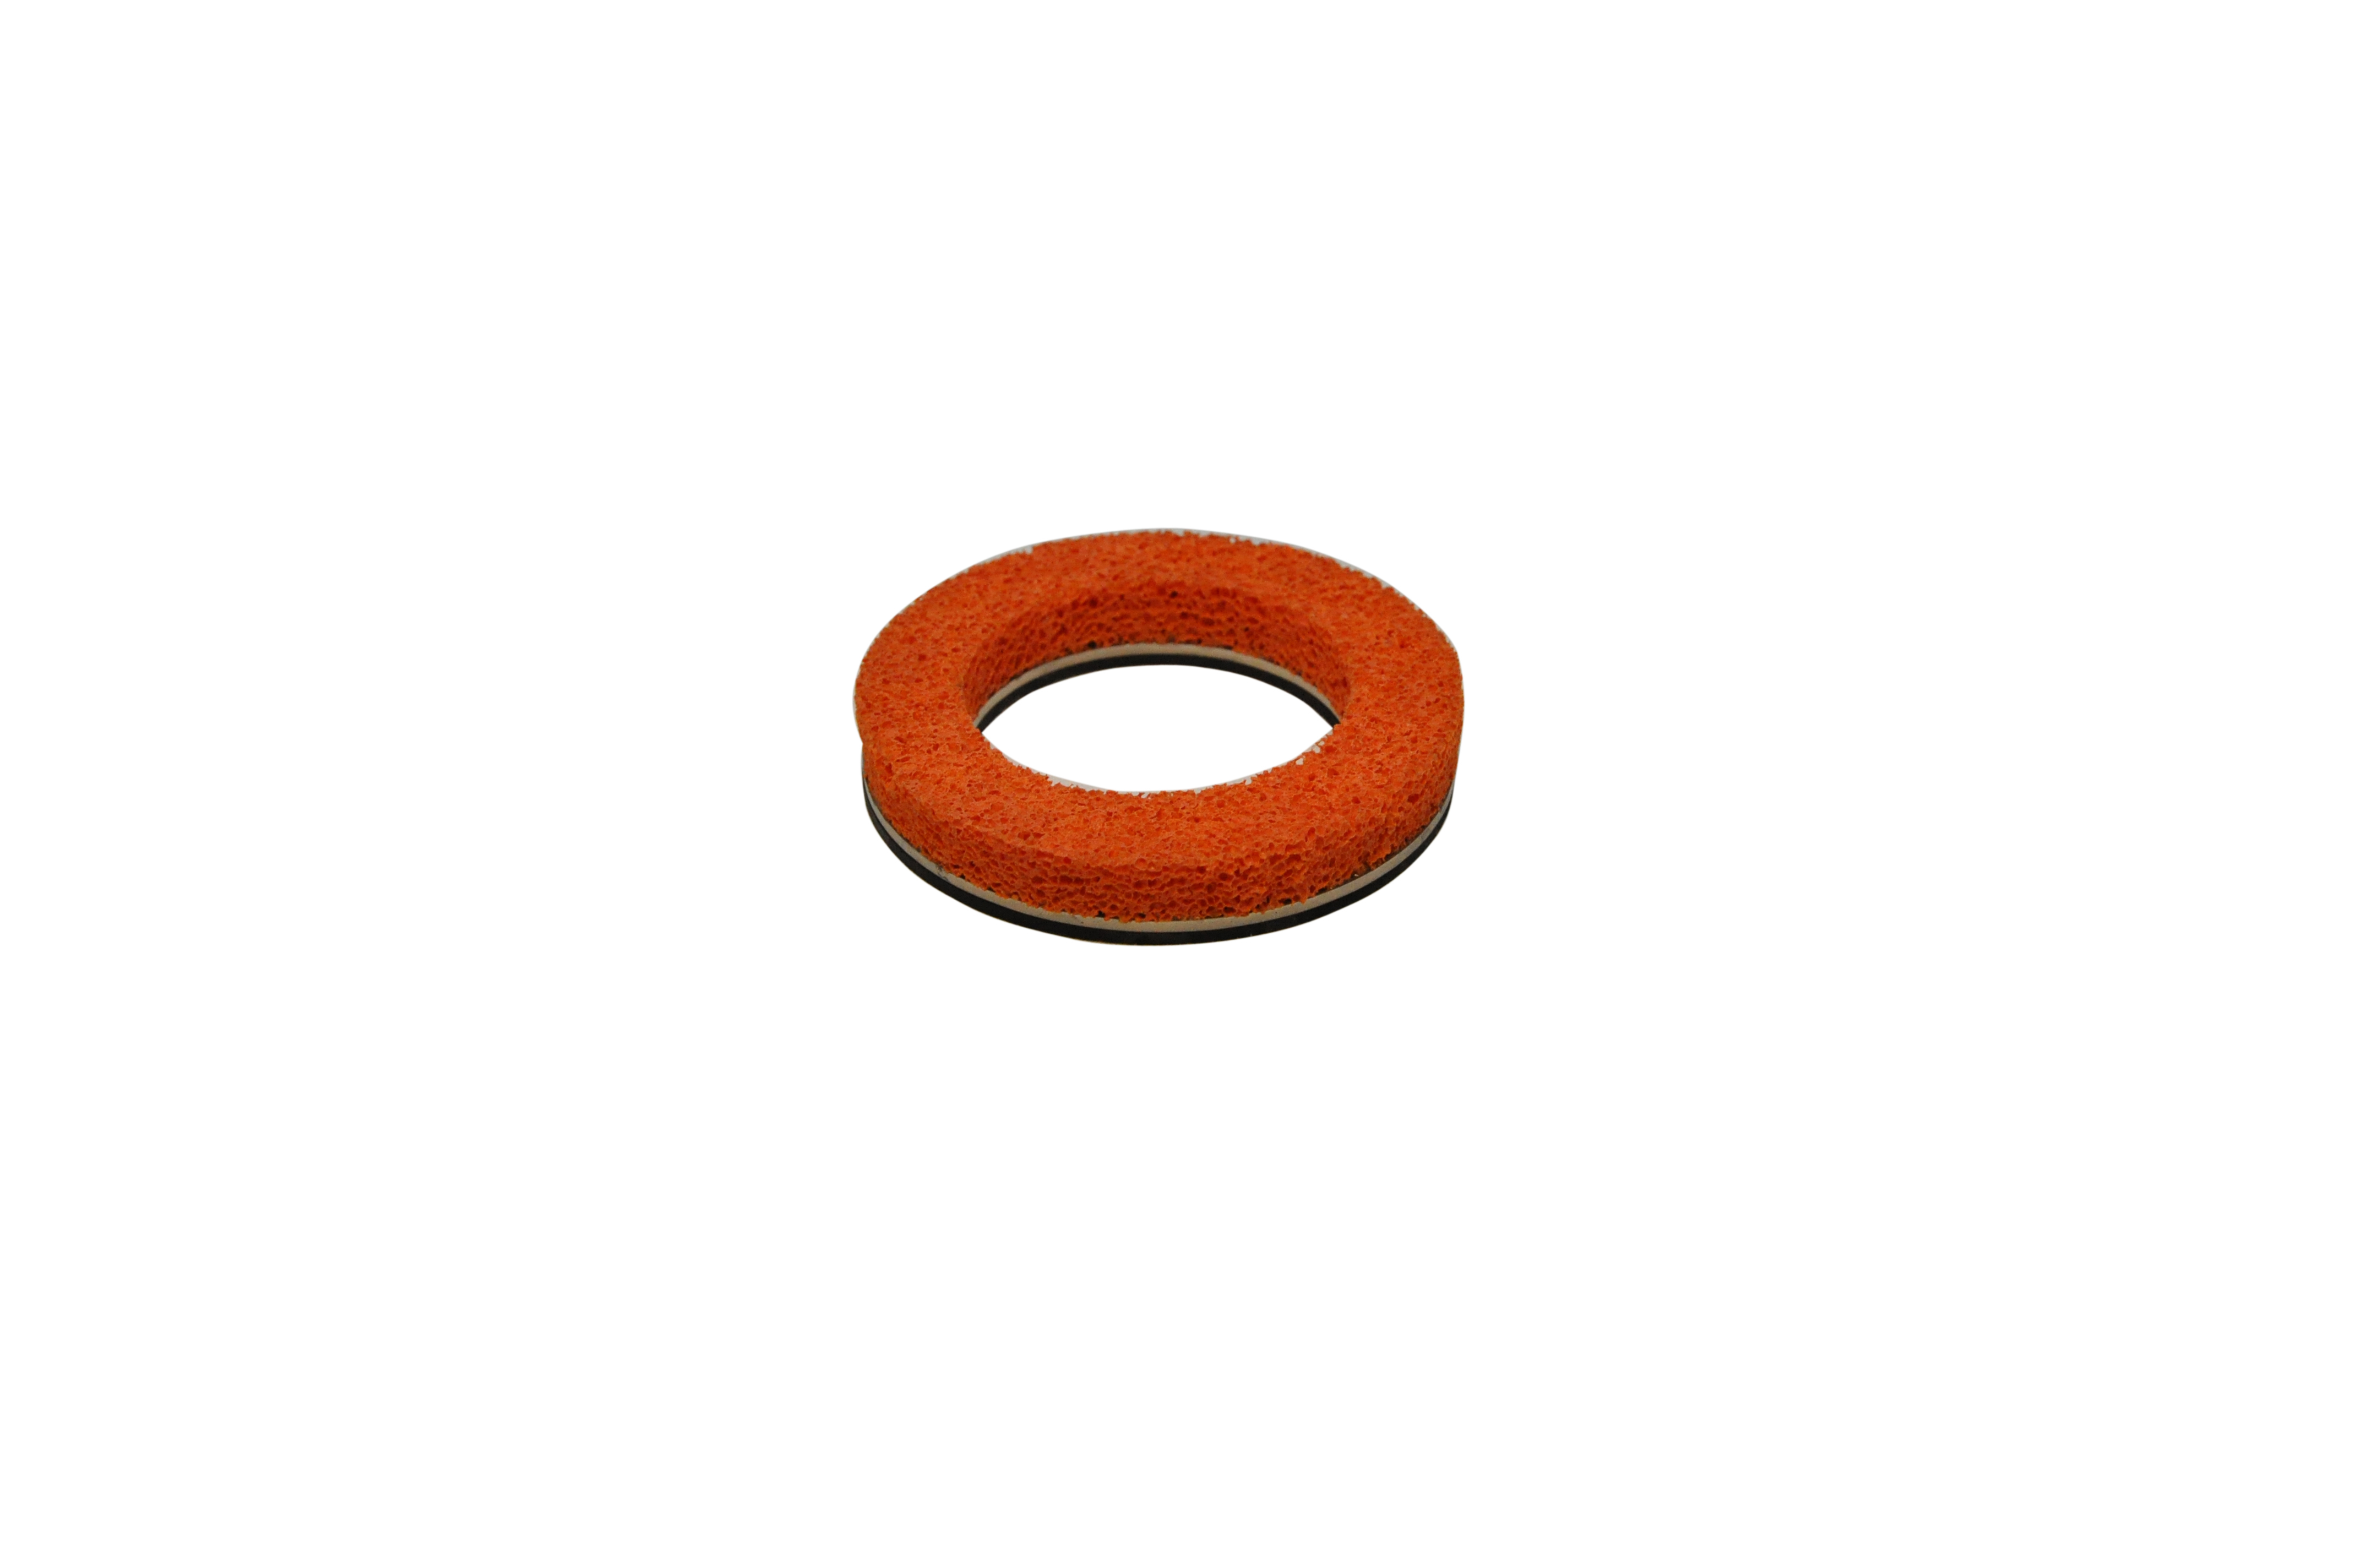 Sponge seal 10 mm including carrier ring and screws